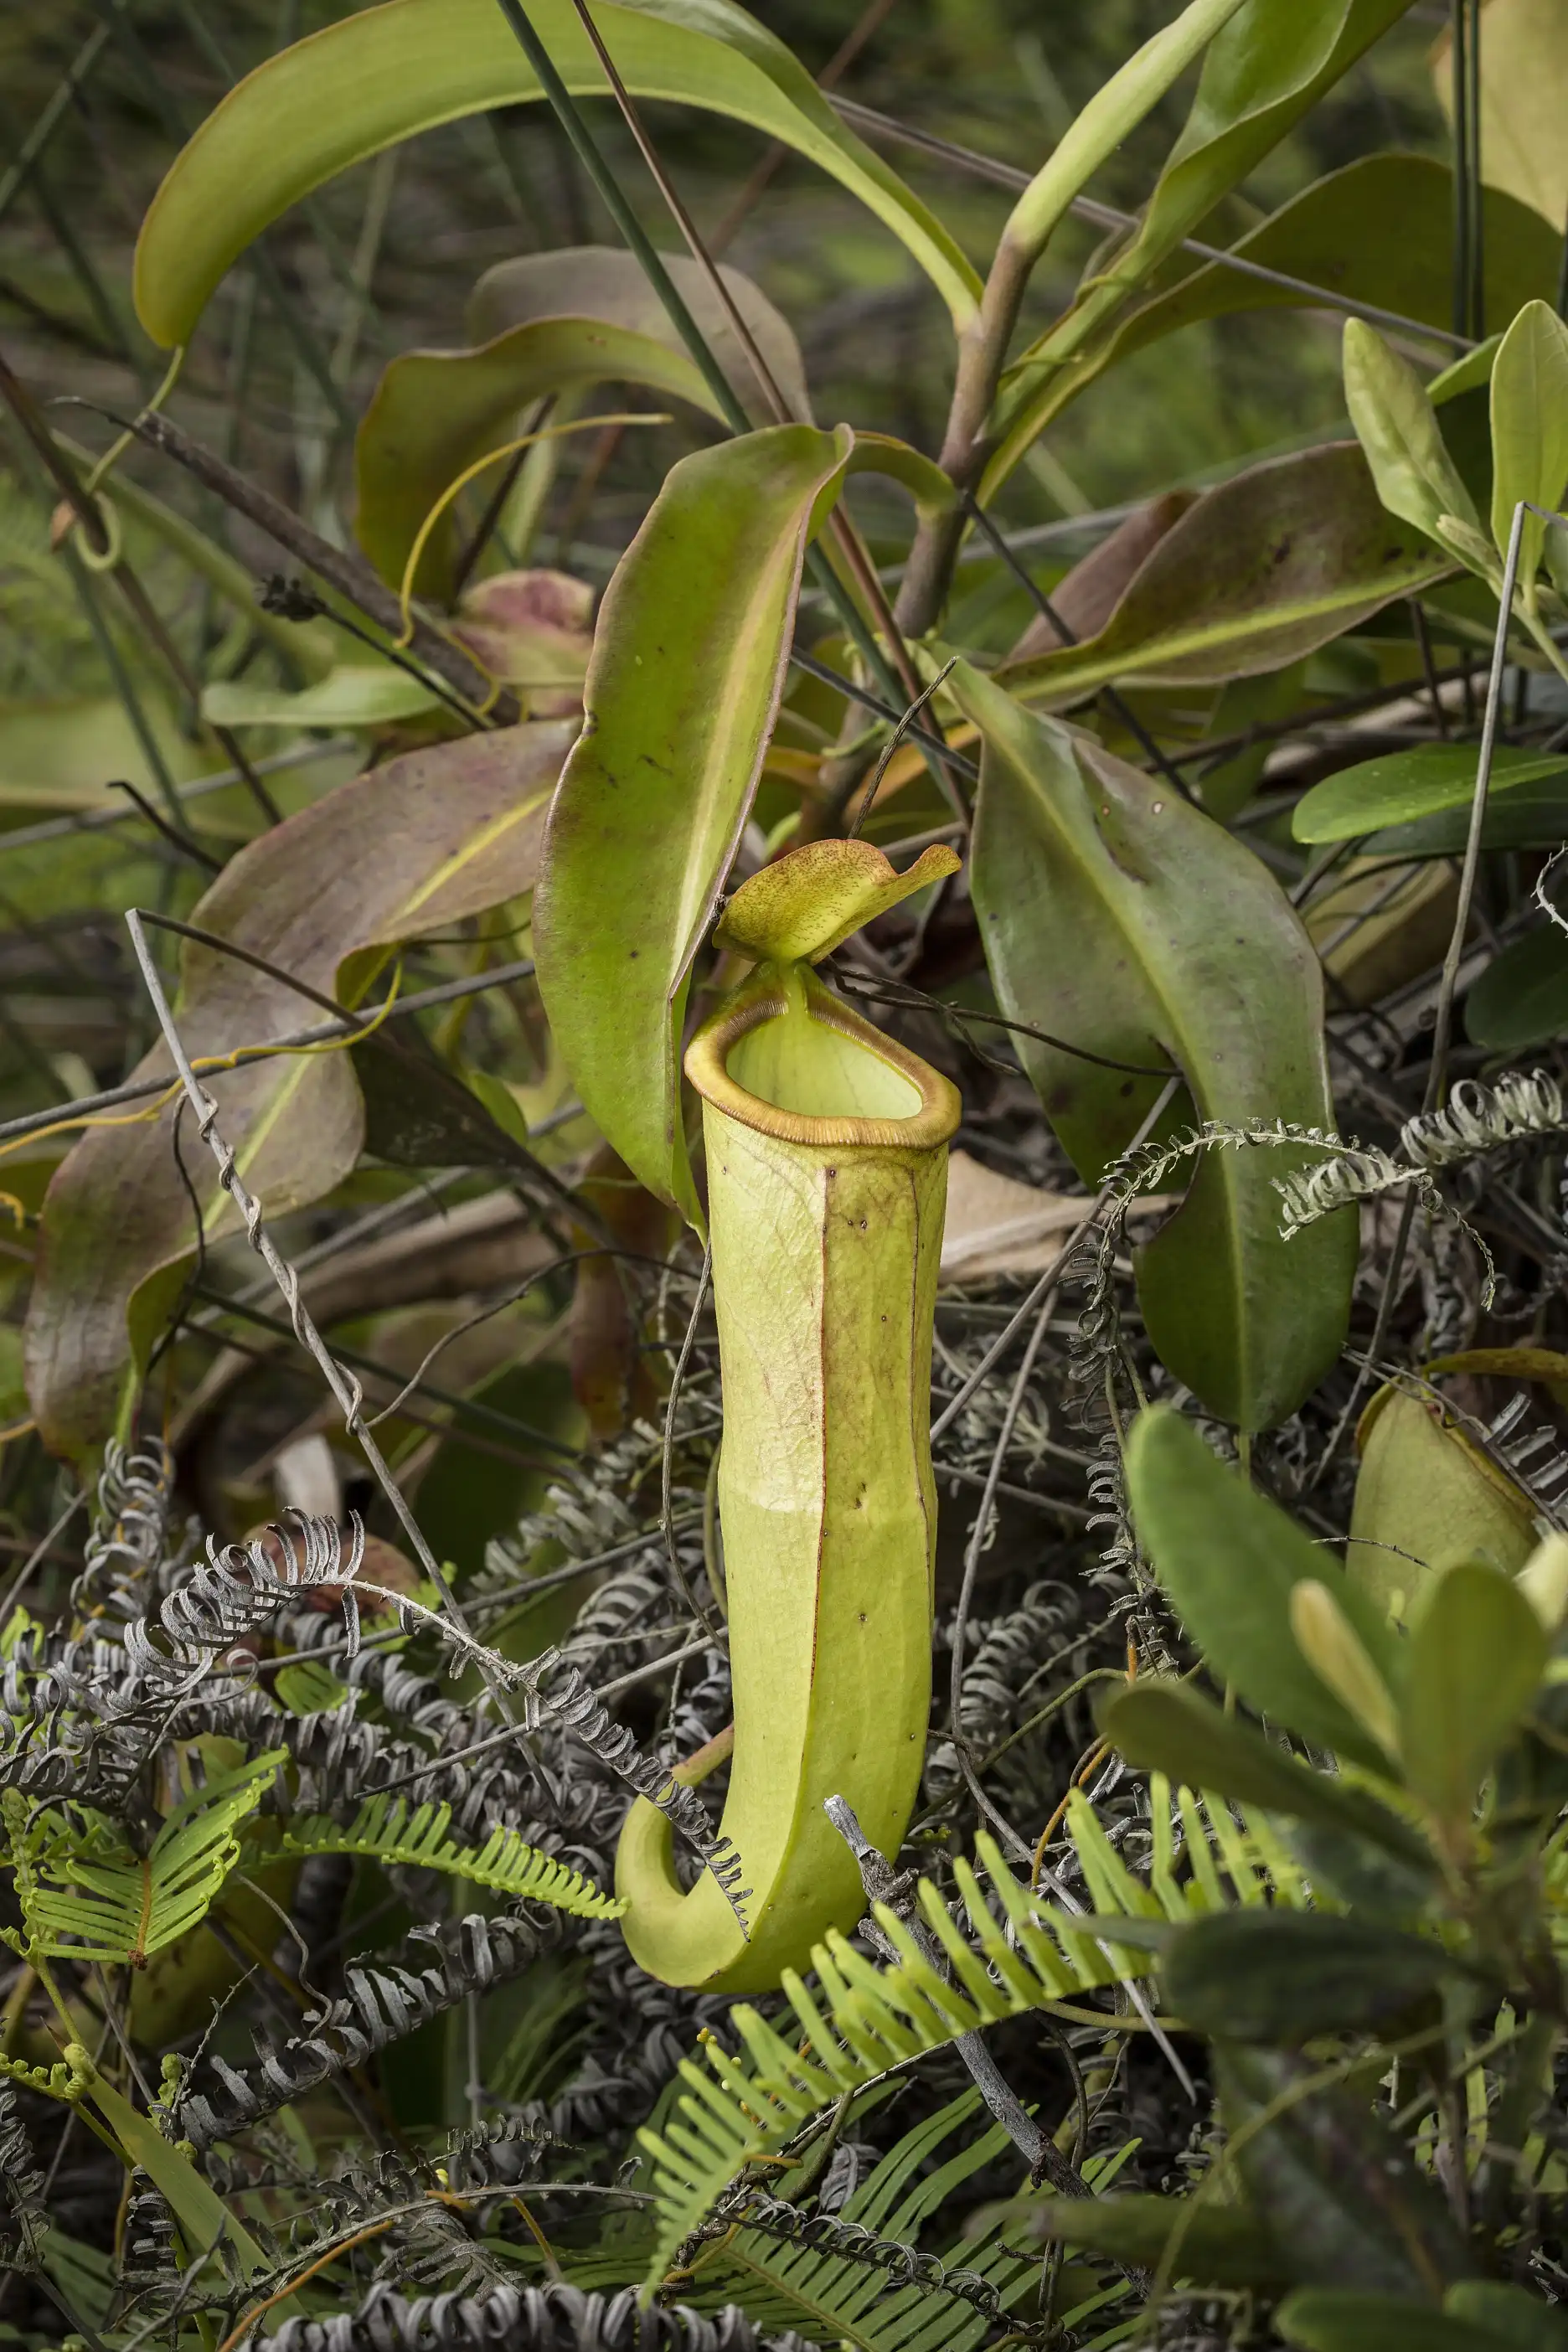 Nepenthes mirabilis grows in Macau, China